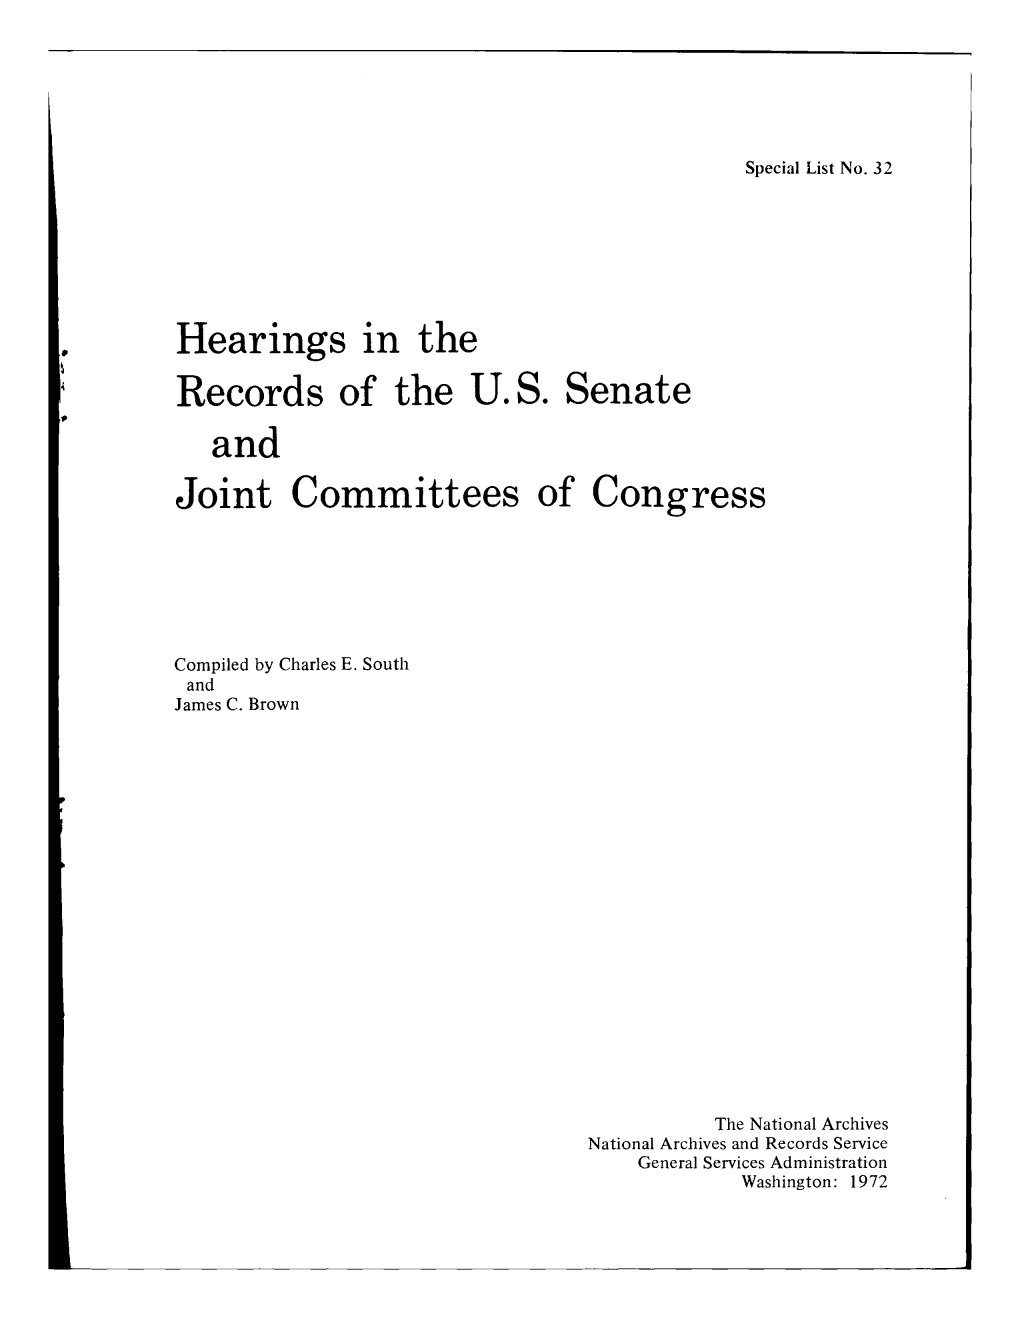 Hearings in the Records of the U. S. Senate and Joint Committees of Congress